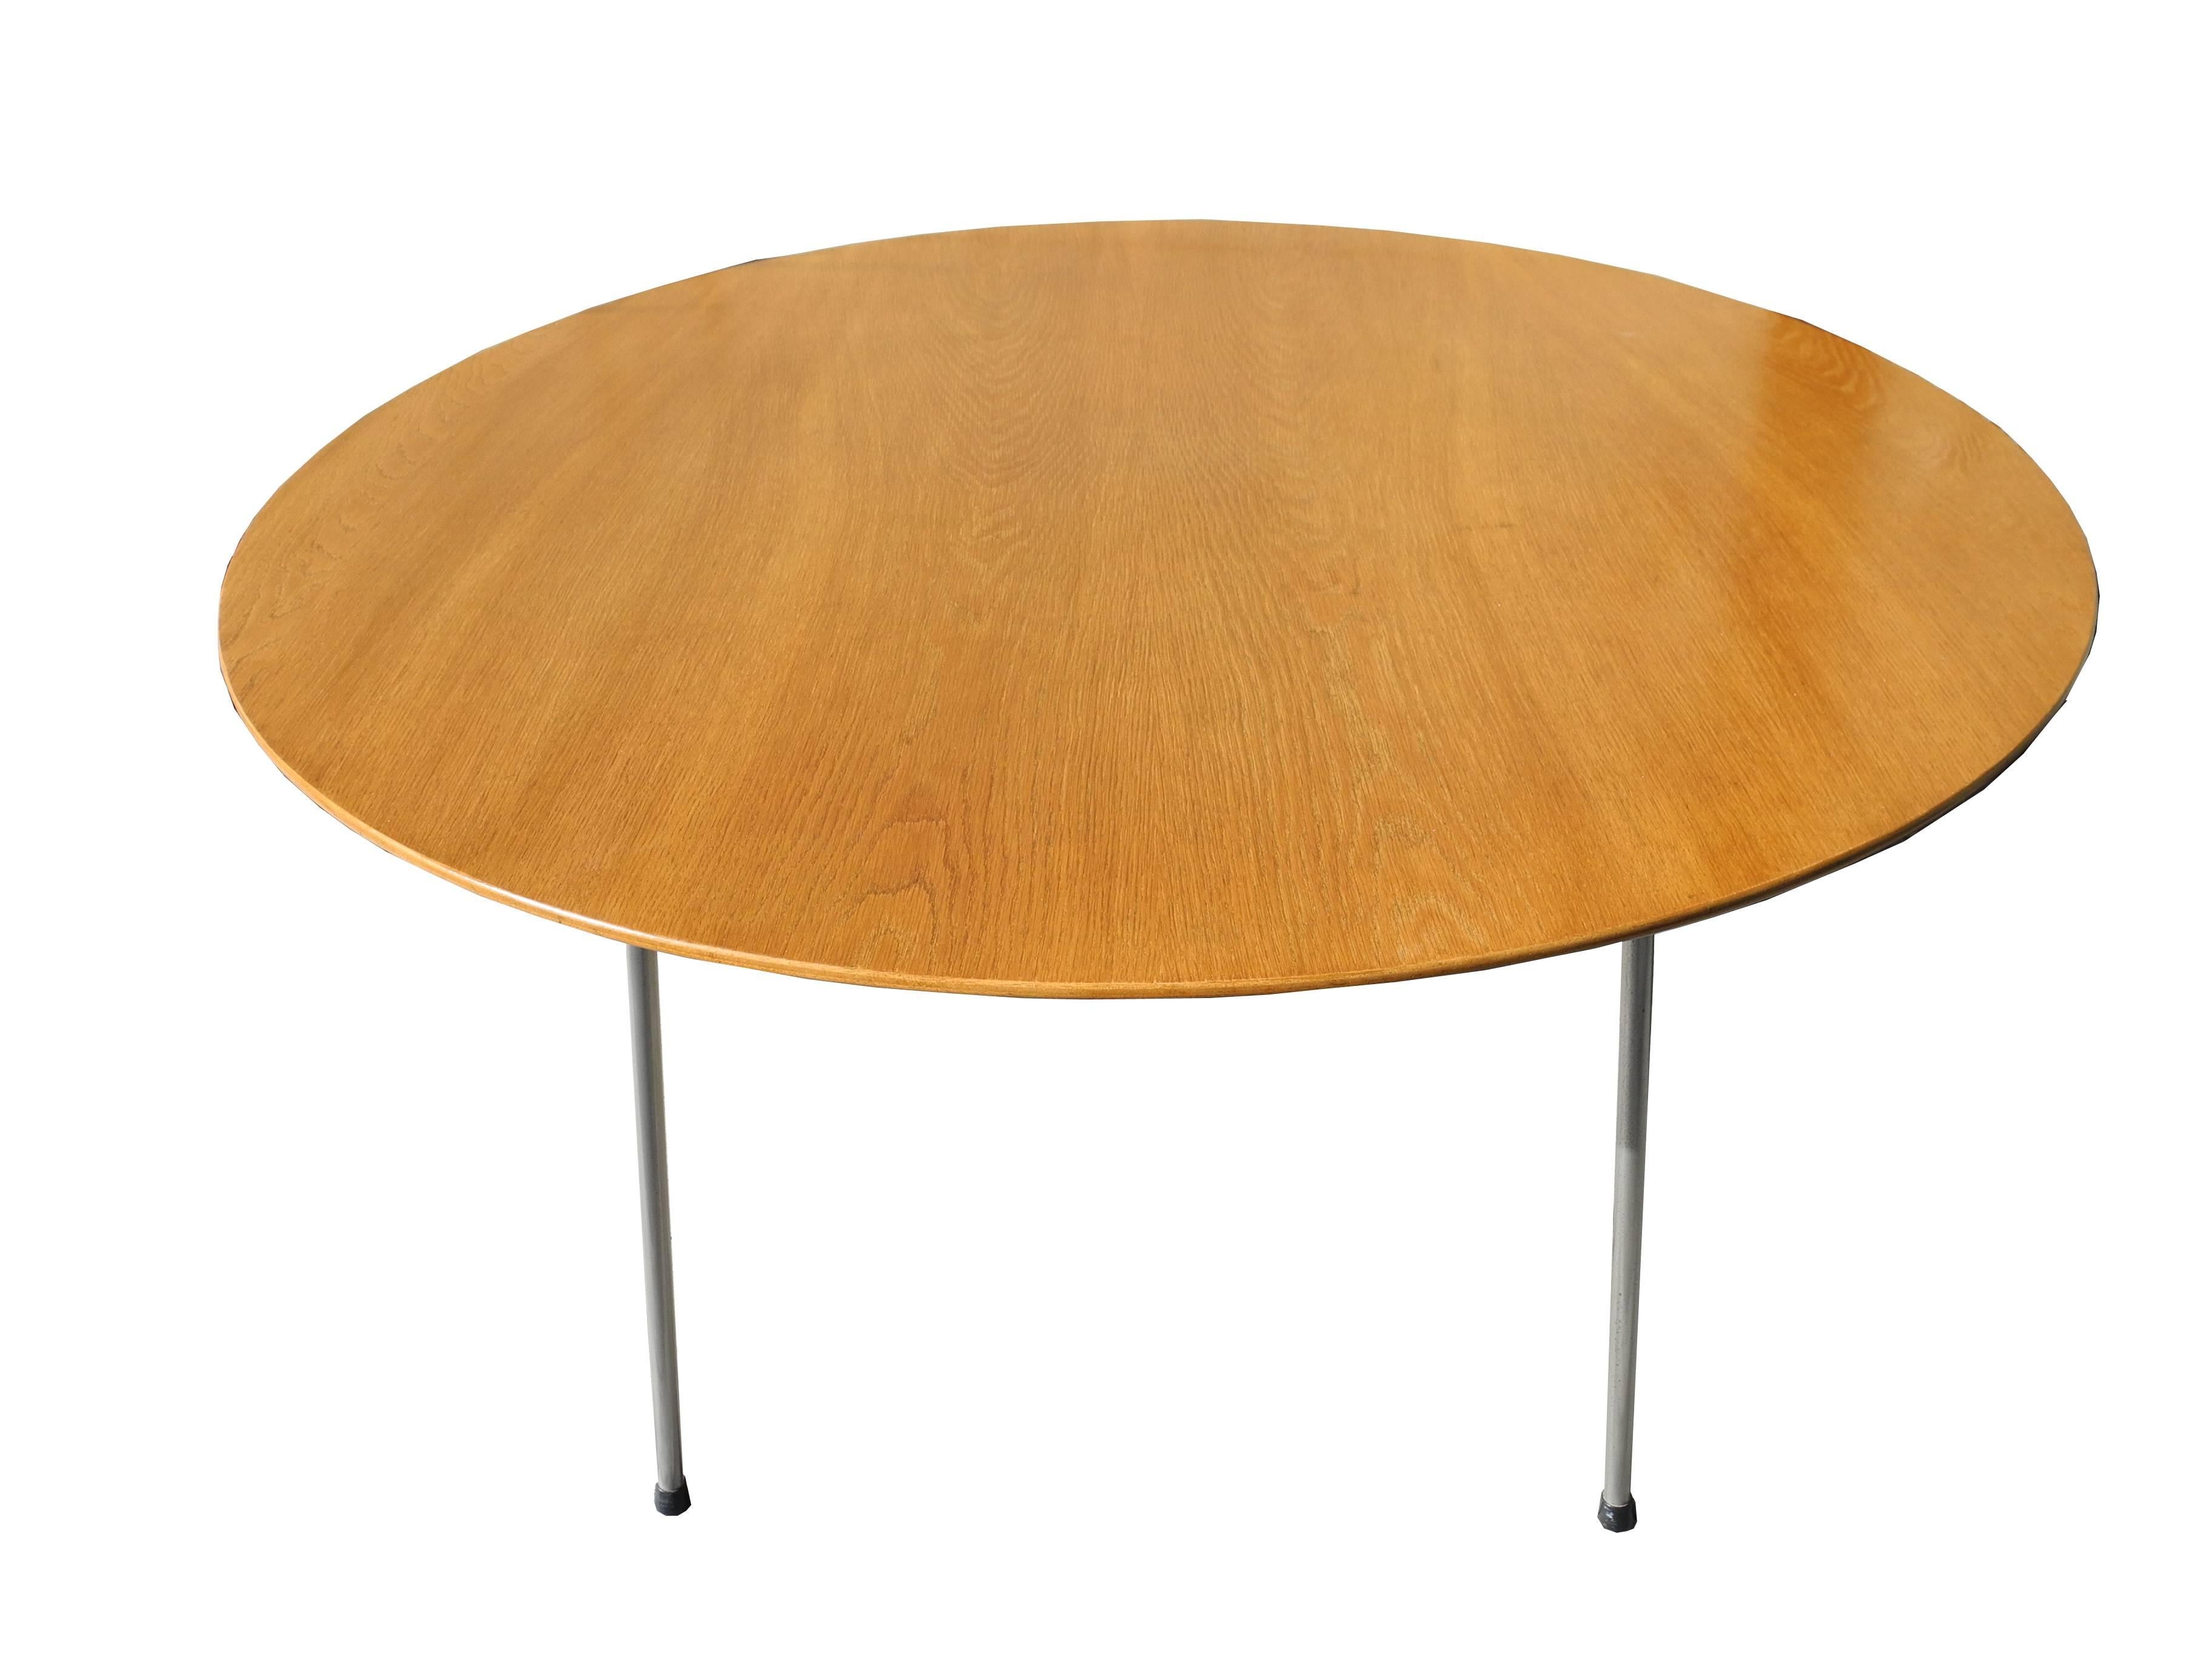 Danish Modern Oak Top Round Table by Arne Jacobsen In Good Condition For Sale In Hudson, NY